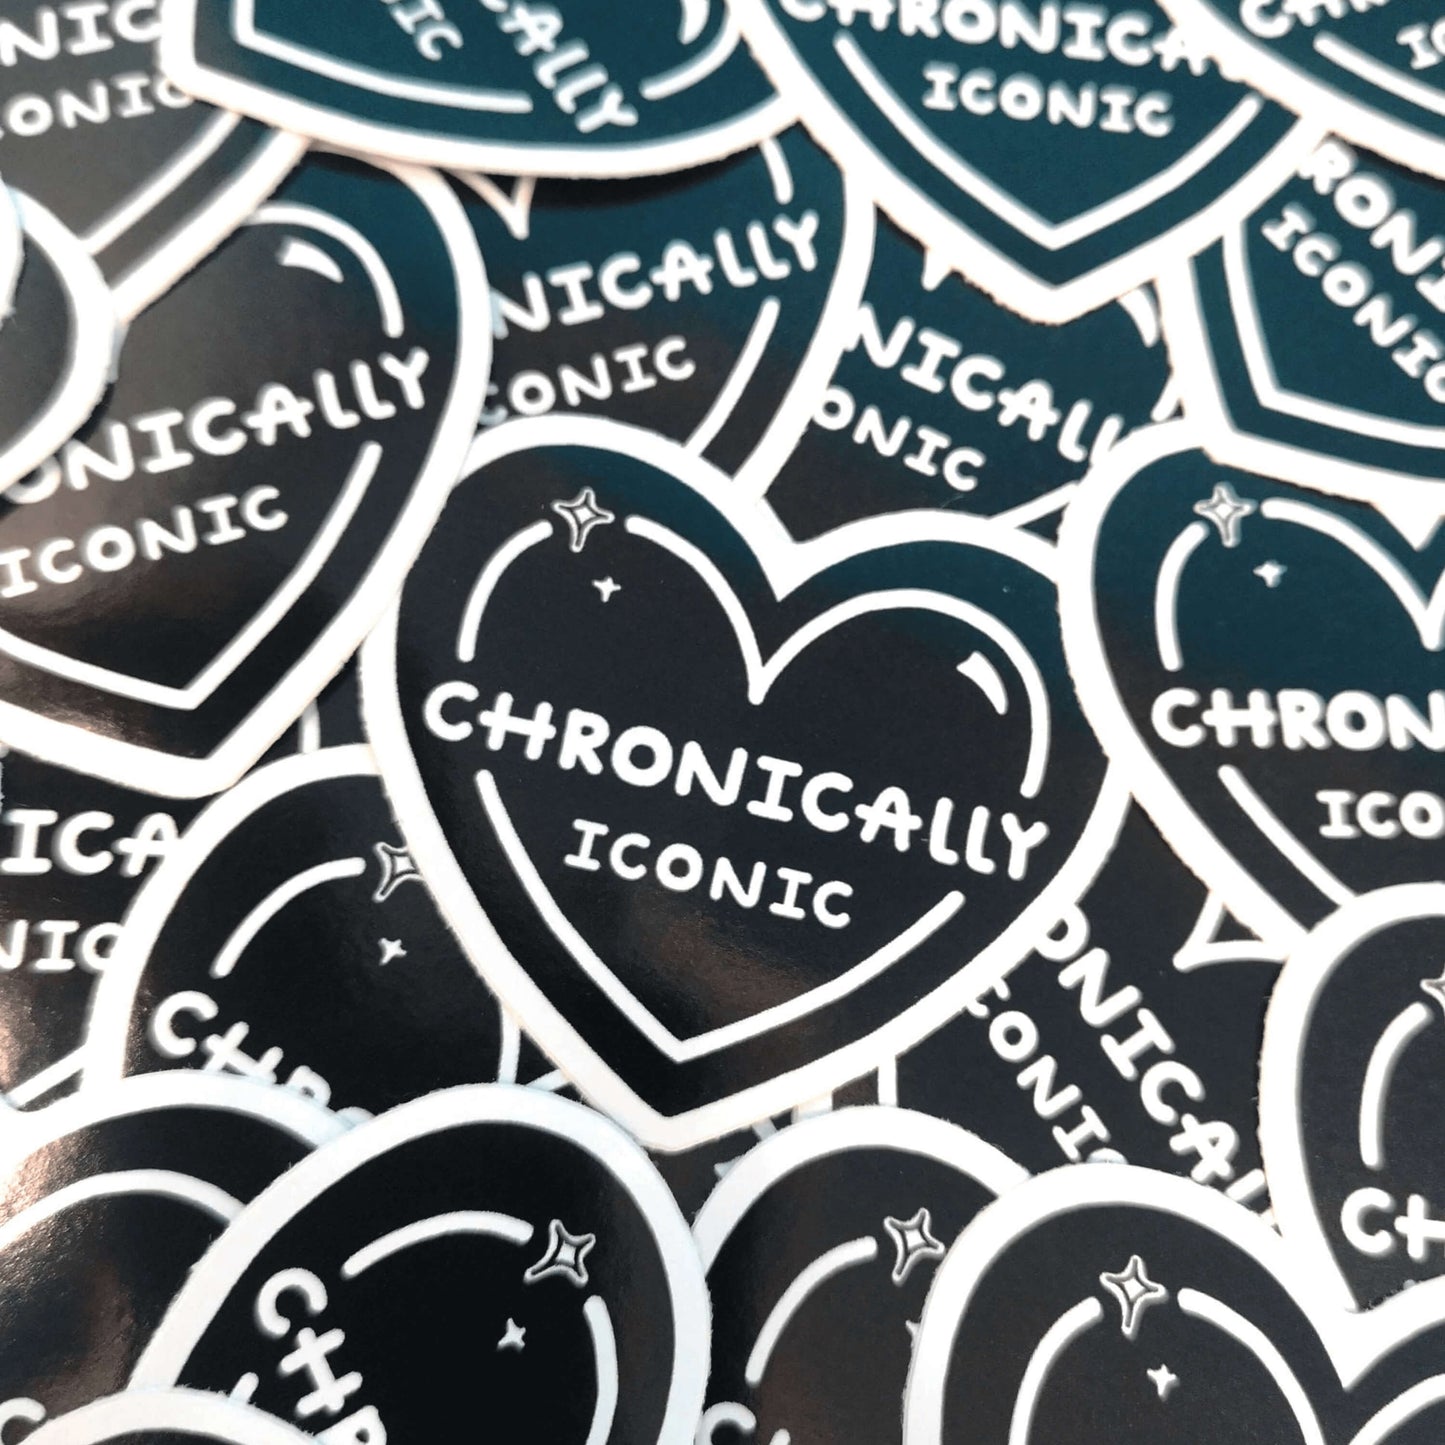 The Chronically Iconic Sticker on a pile of multiple copies of the sticker. The black heart shaped sticker has a white outline with sparkles and centre text reading 'chronically iconic'. The design is raising awareness for chronic illness and invisible illness.